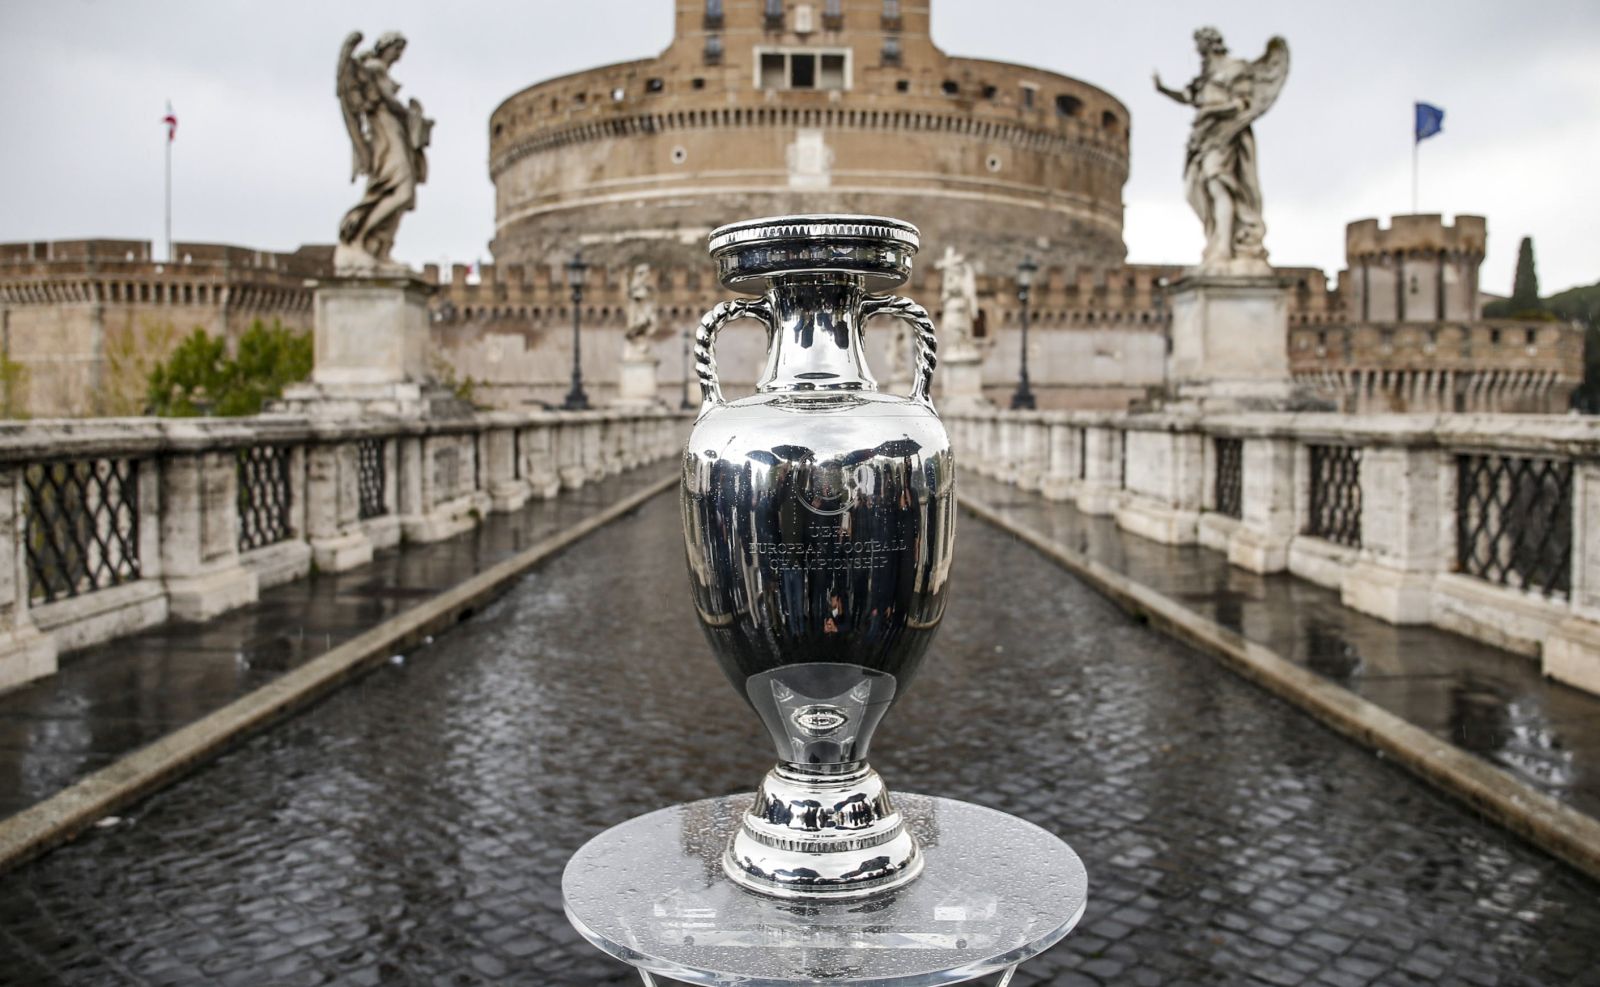 epa09147192 The Henri Delaunay Cup, which will be presented to the captain of the winning football team of the next UEFA EURO 2020, during the trophy tour at Castel Sant'Angelo in Rome, Italy, 20 April 2021. The UEFA EURO 2020 was originally scheduled to take place from 12 June to 12 July 2020, but was delayed due to COVID-19, and was later confirmed that it will take place from 11 June to 11 July 2021.  EPA/FABIO FRUSTACI